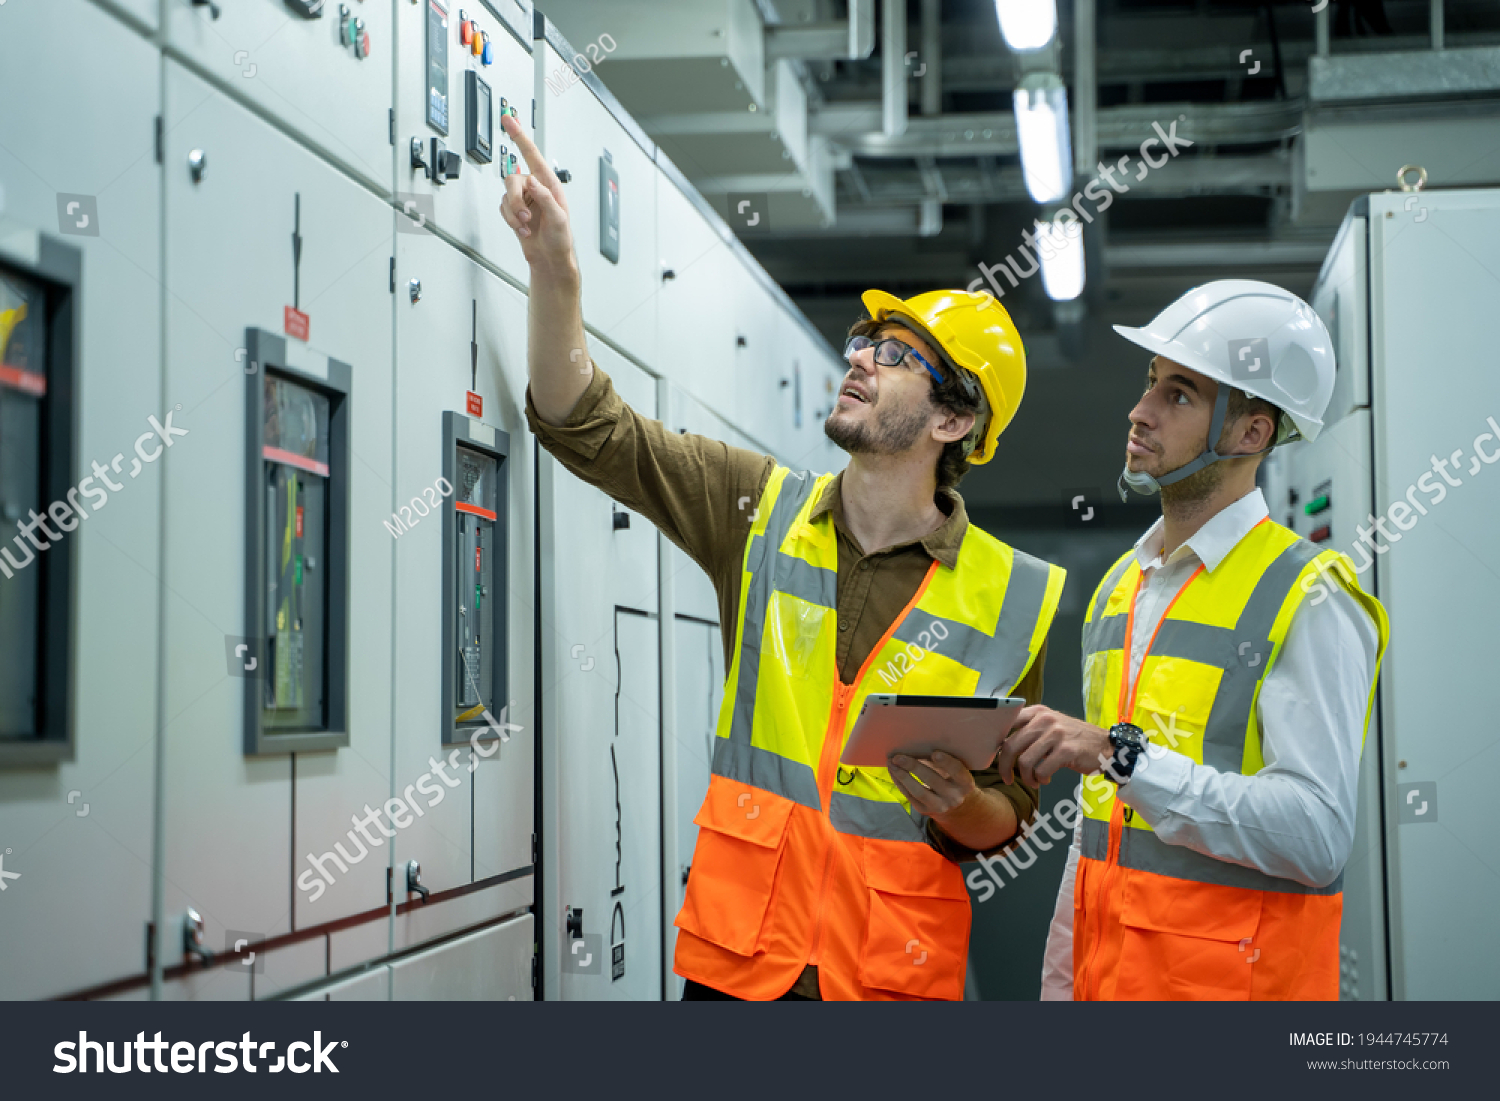 Engineer and technical worker working on the checking status switchgear electrical energy distribution substation at industry factory. #1944745774